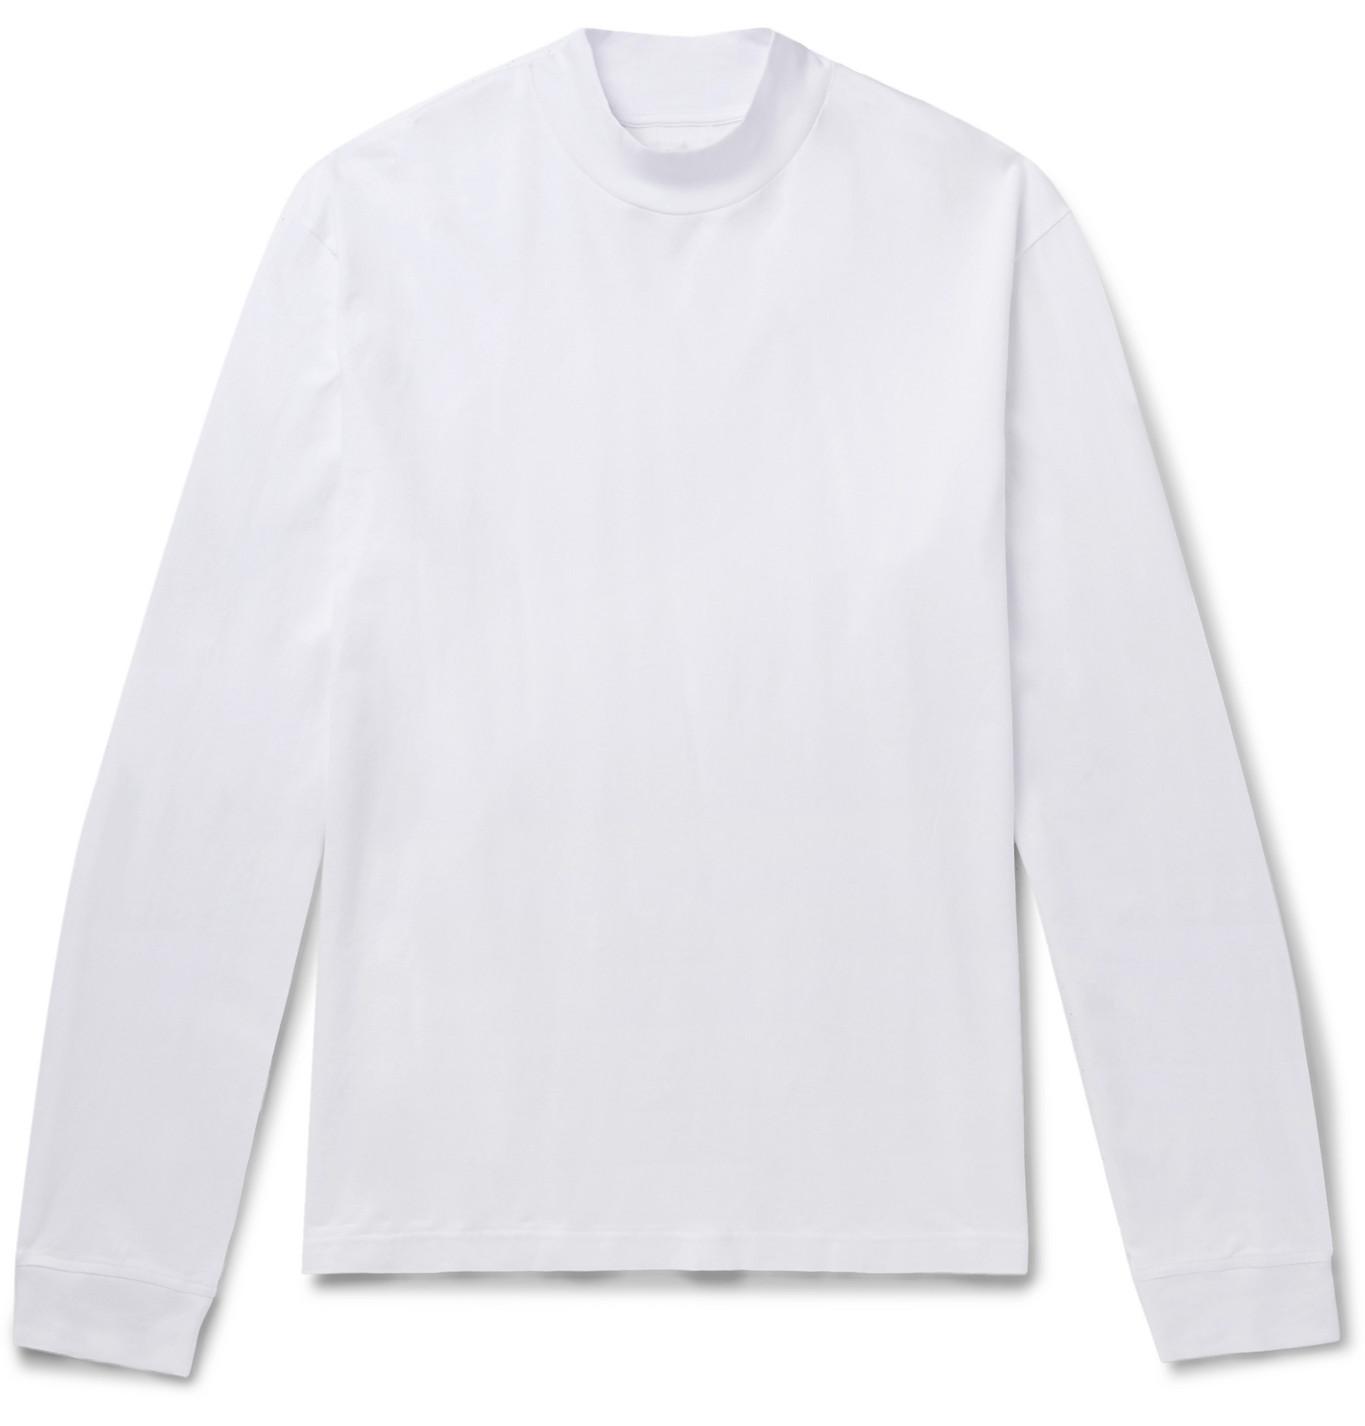 Download Acne Studios Cotton-jersey Mock-neck T-shirt in White for ...